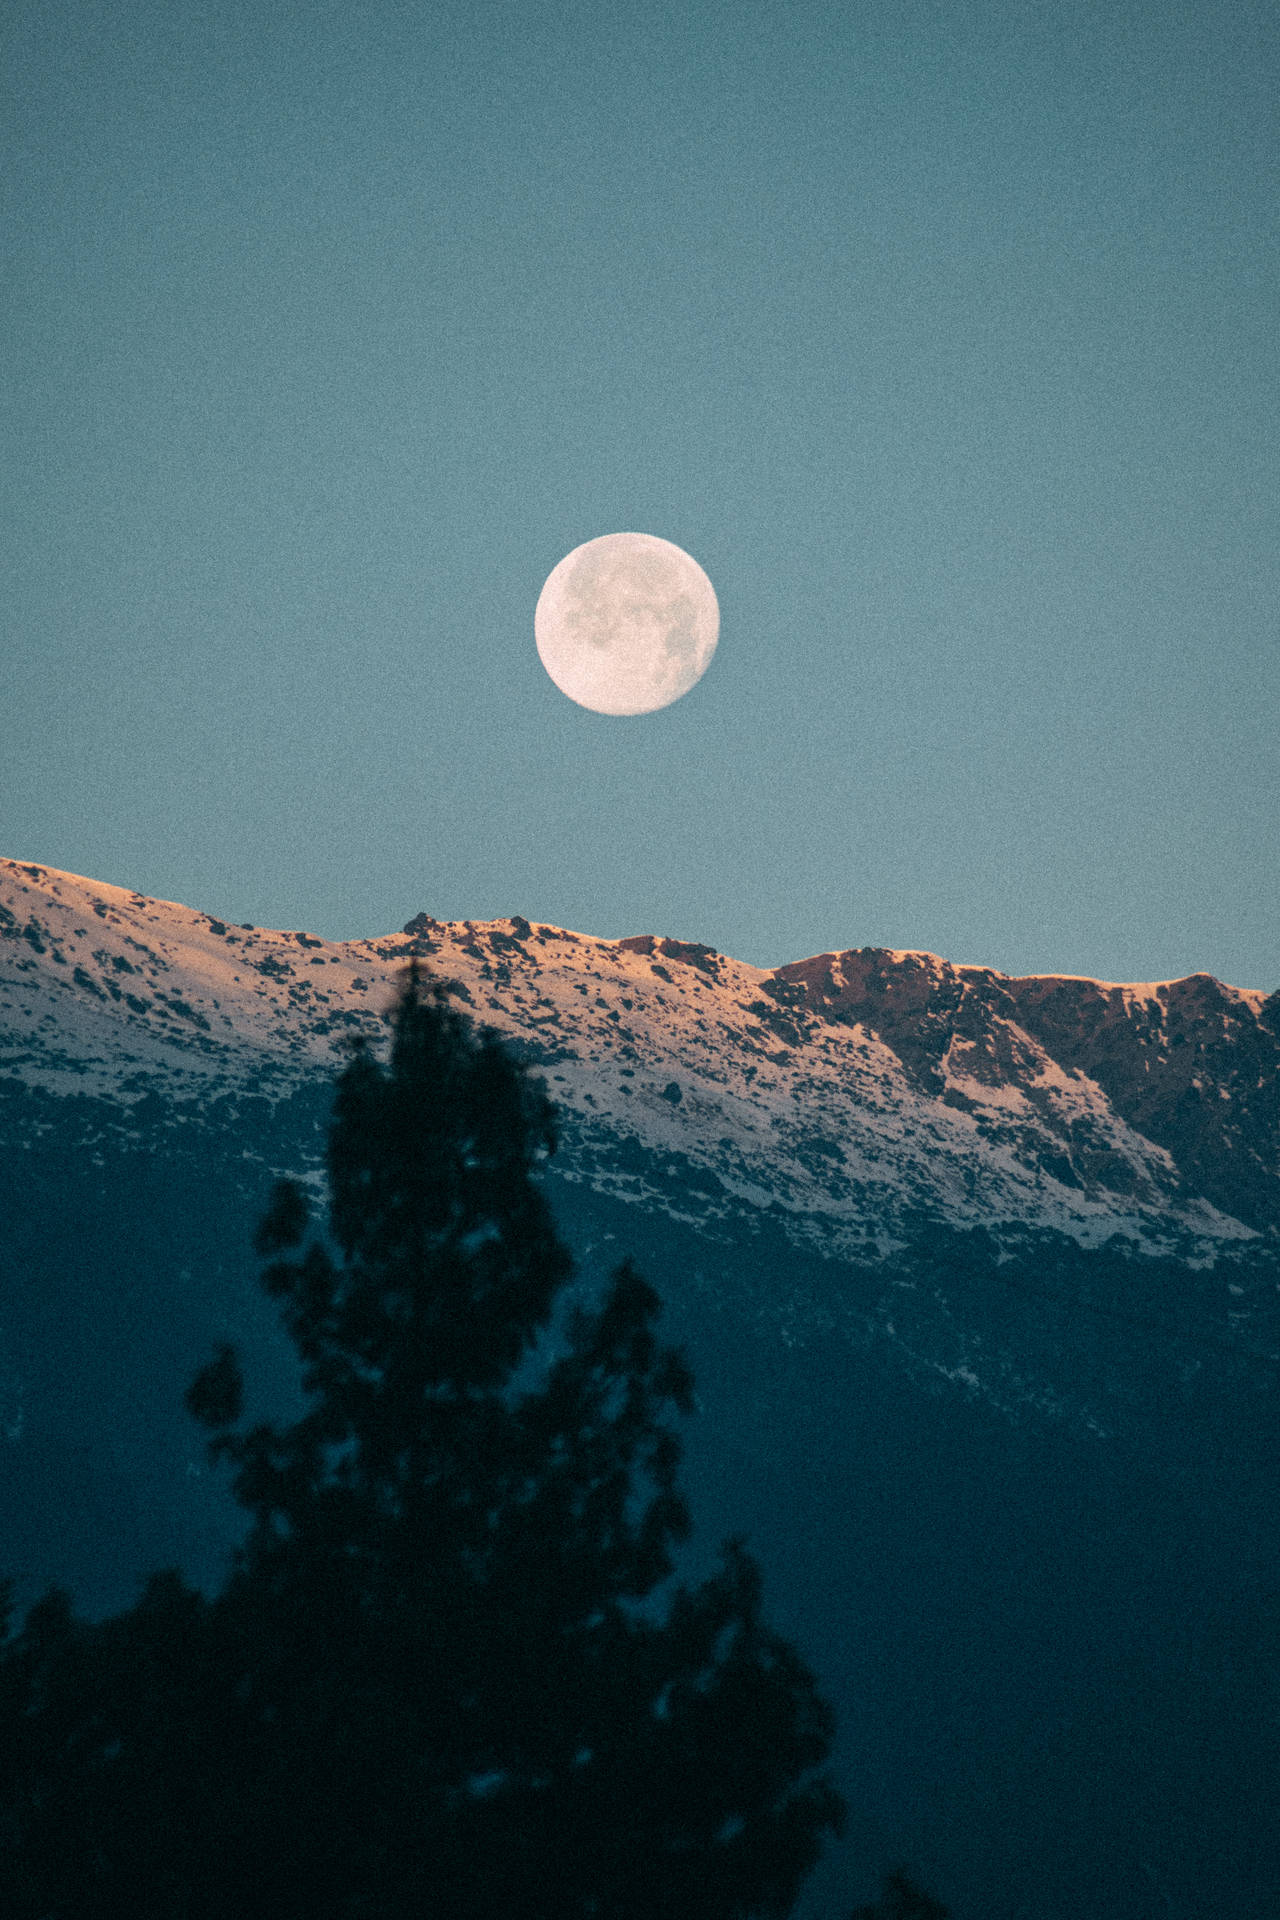 Mountain Tree And Beautiful Full Moon Background